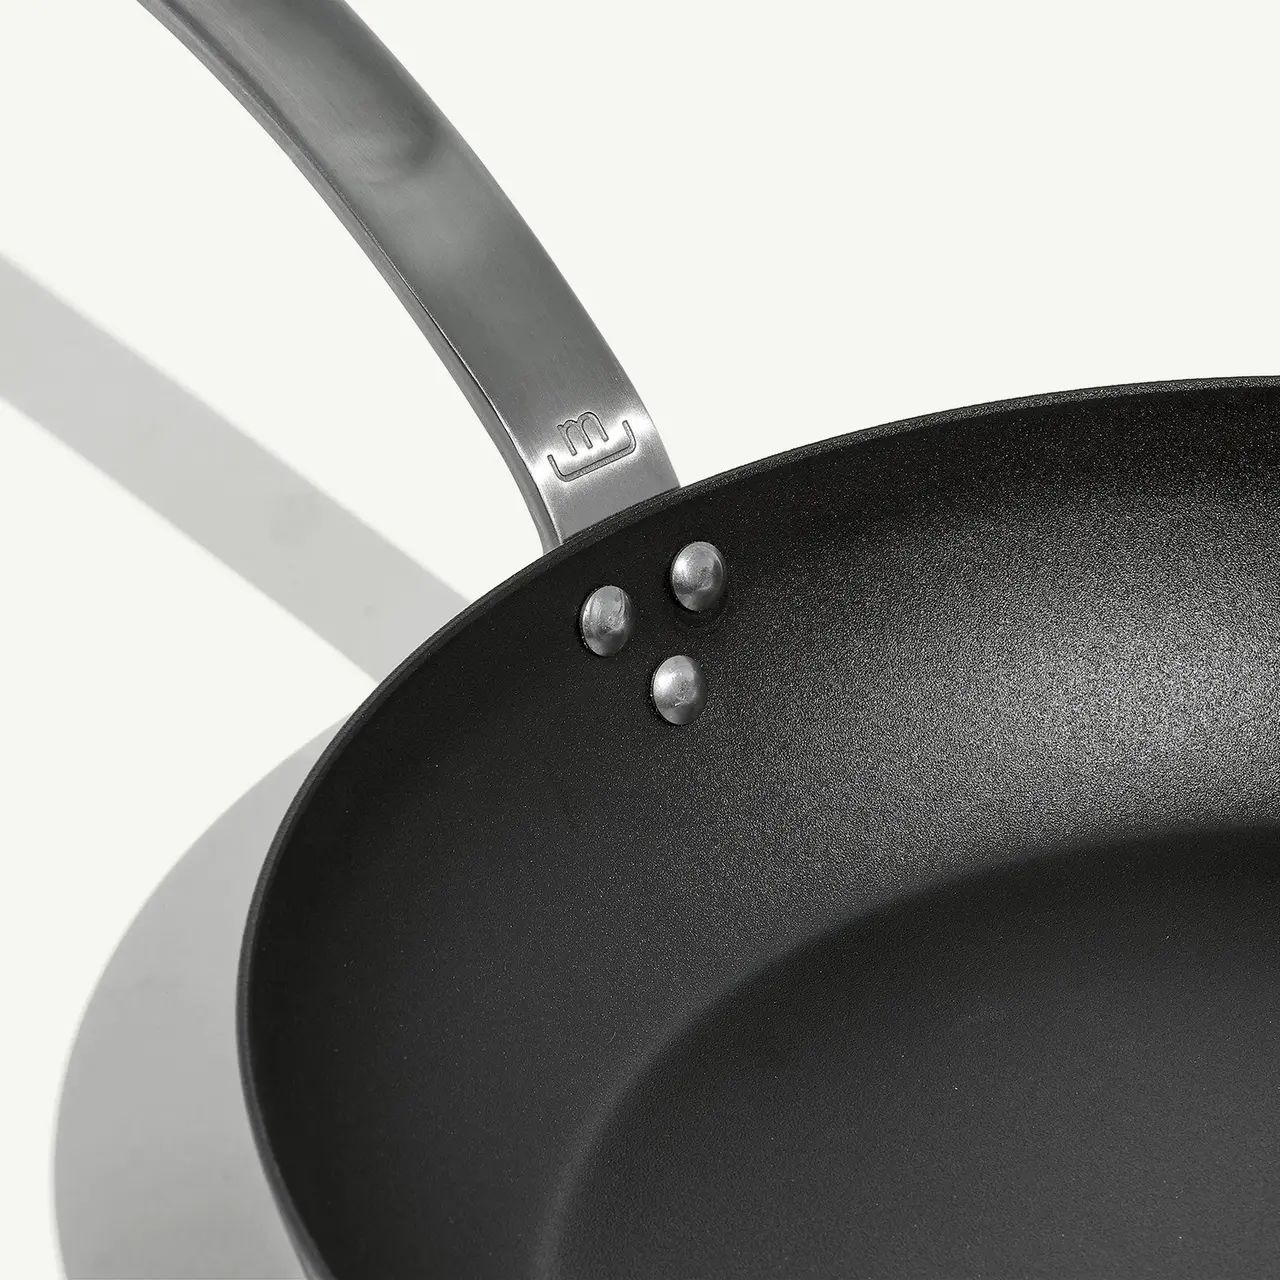 A non-stick frying pan is shown at a slight angle, displaying its interior surface and part of the handle against a light background with subtle shadows.